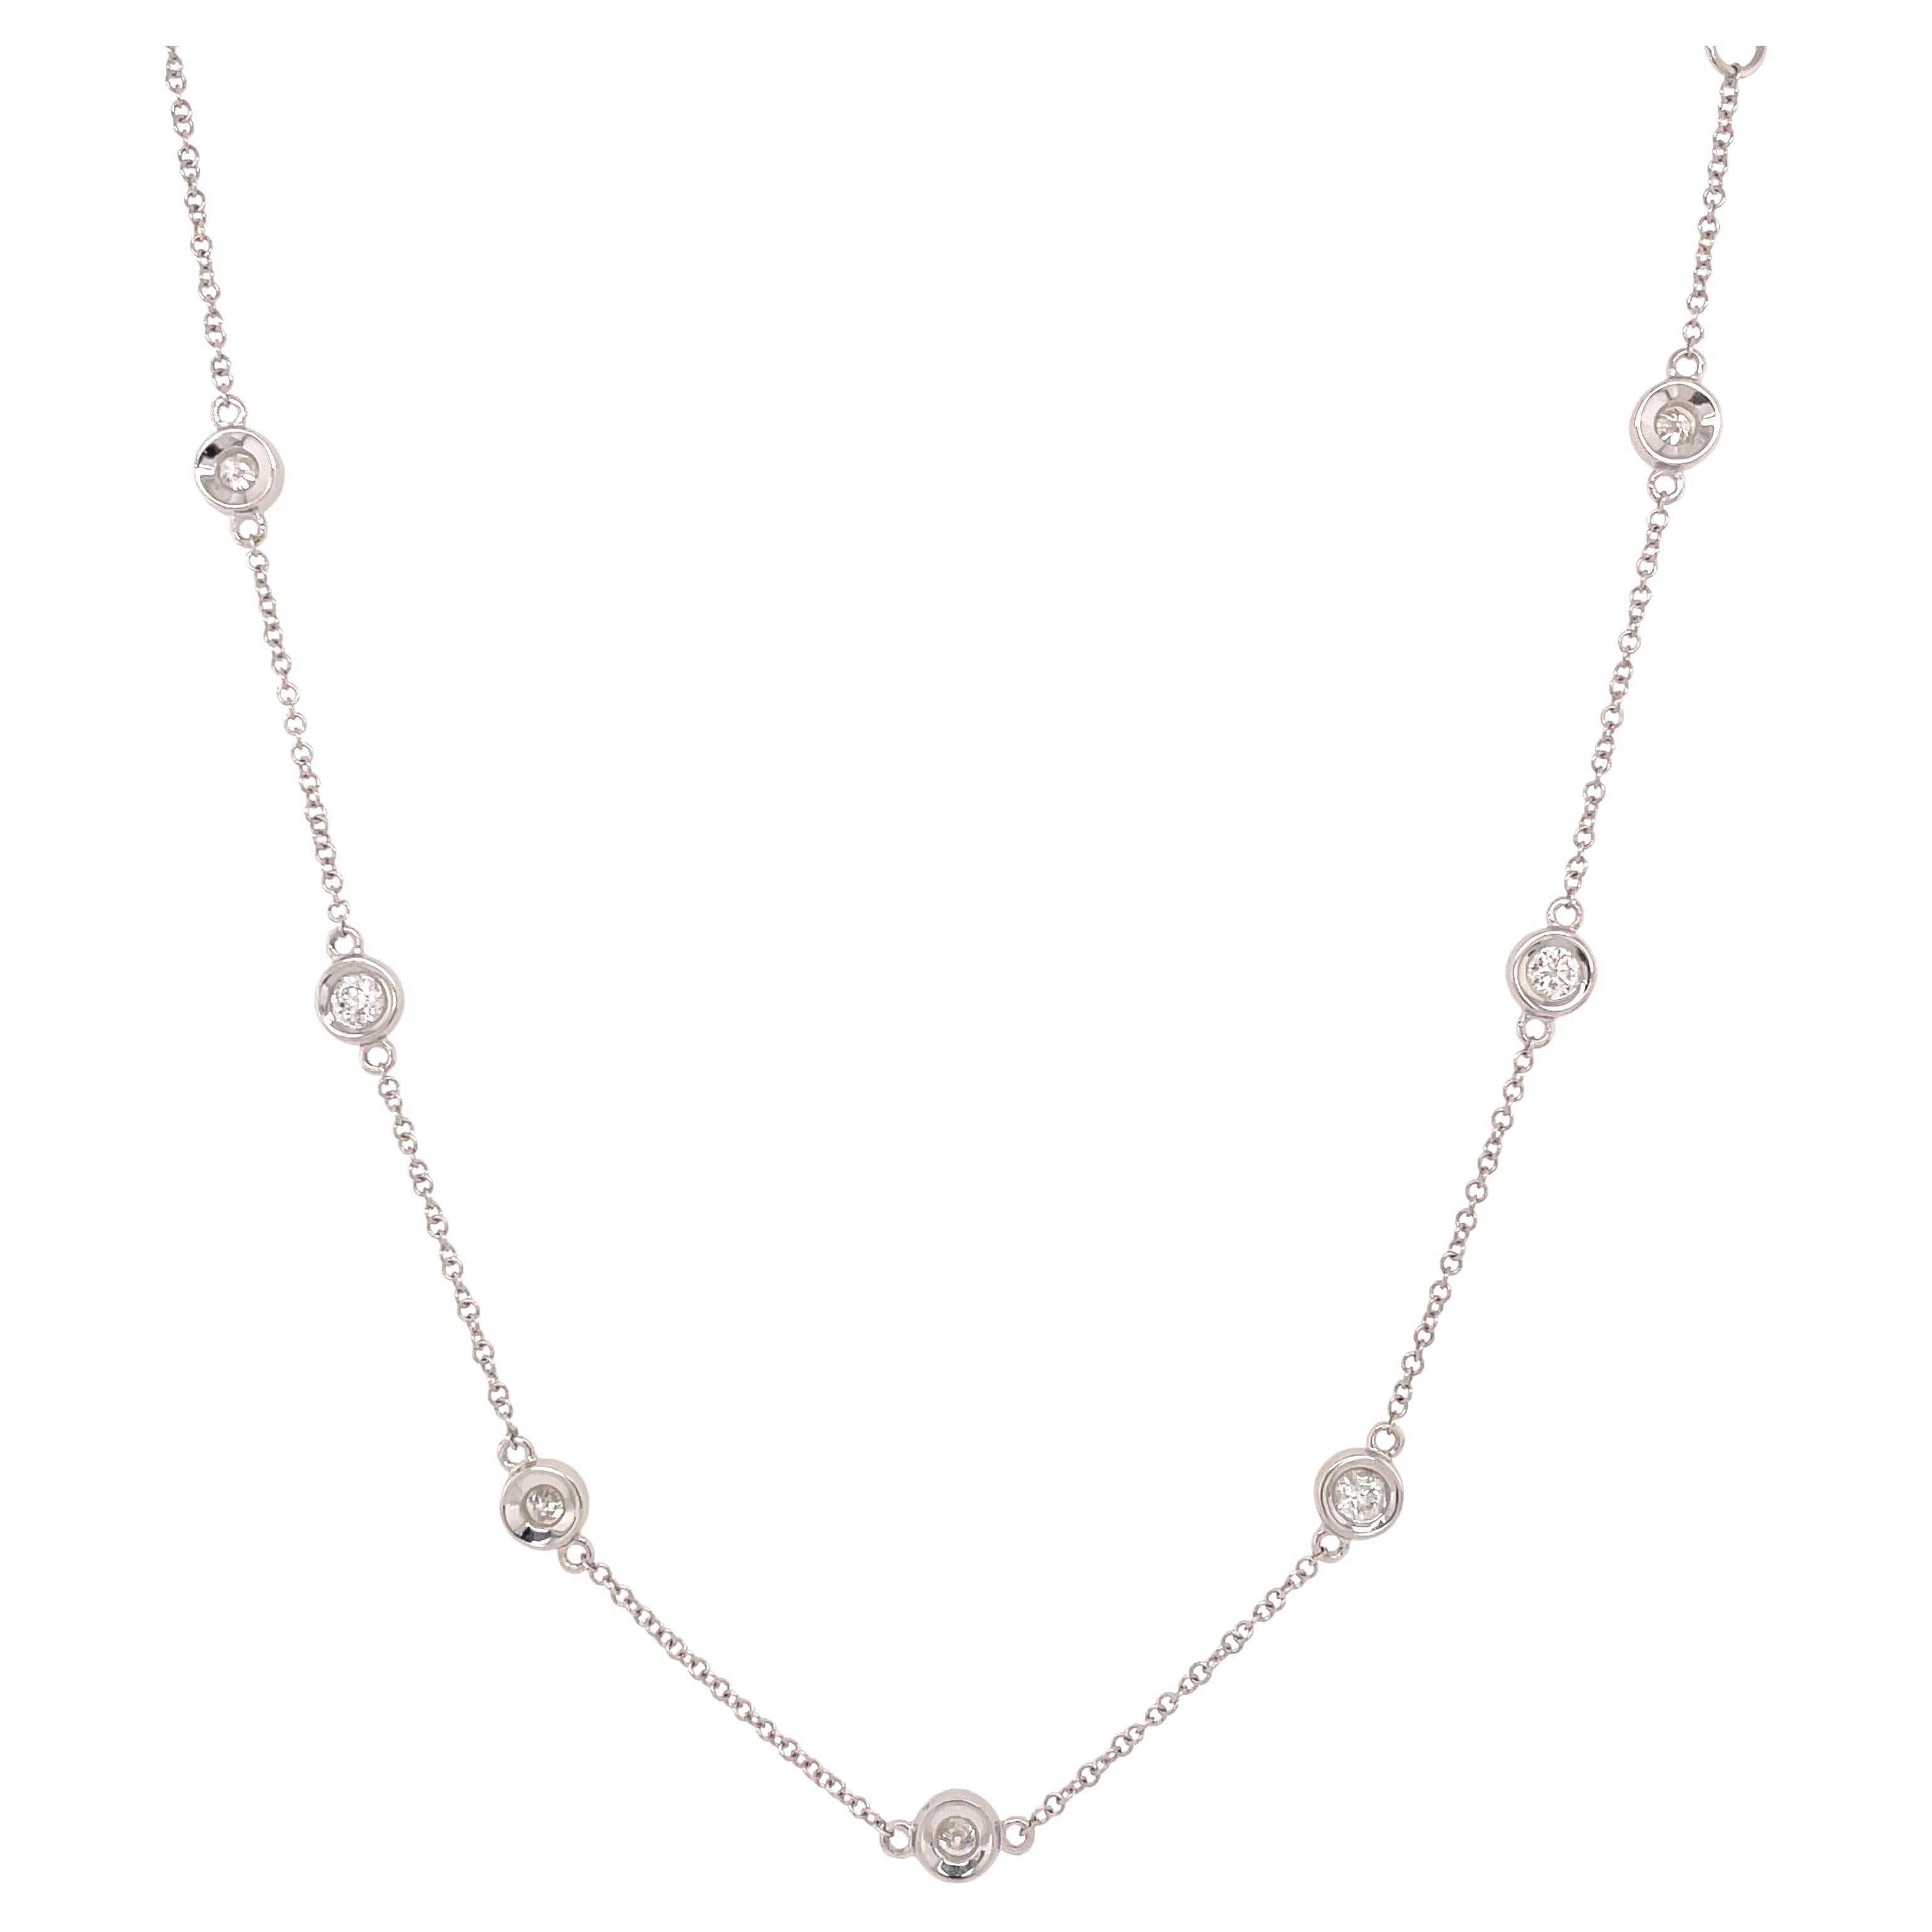 Rachel Koen Diamonds by the Yard Necklace 14K White Gold 0.77Cttw 18 inches